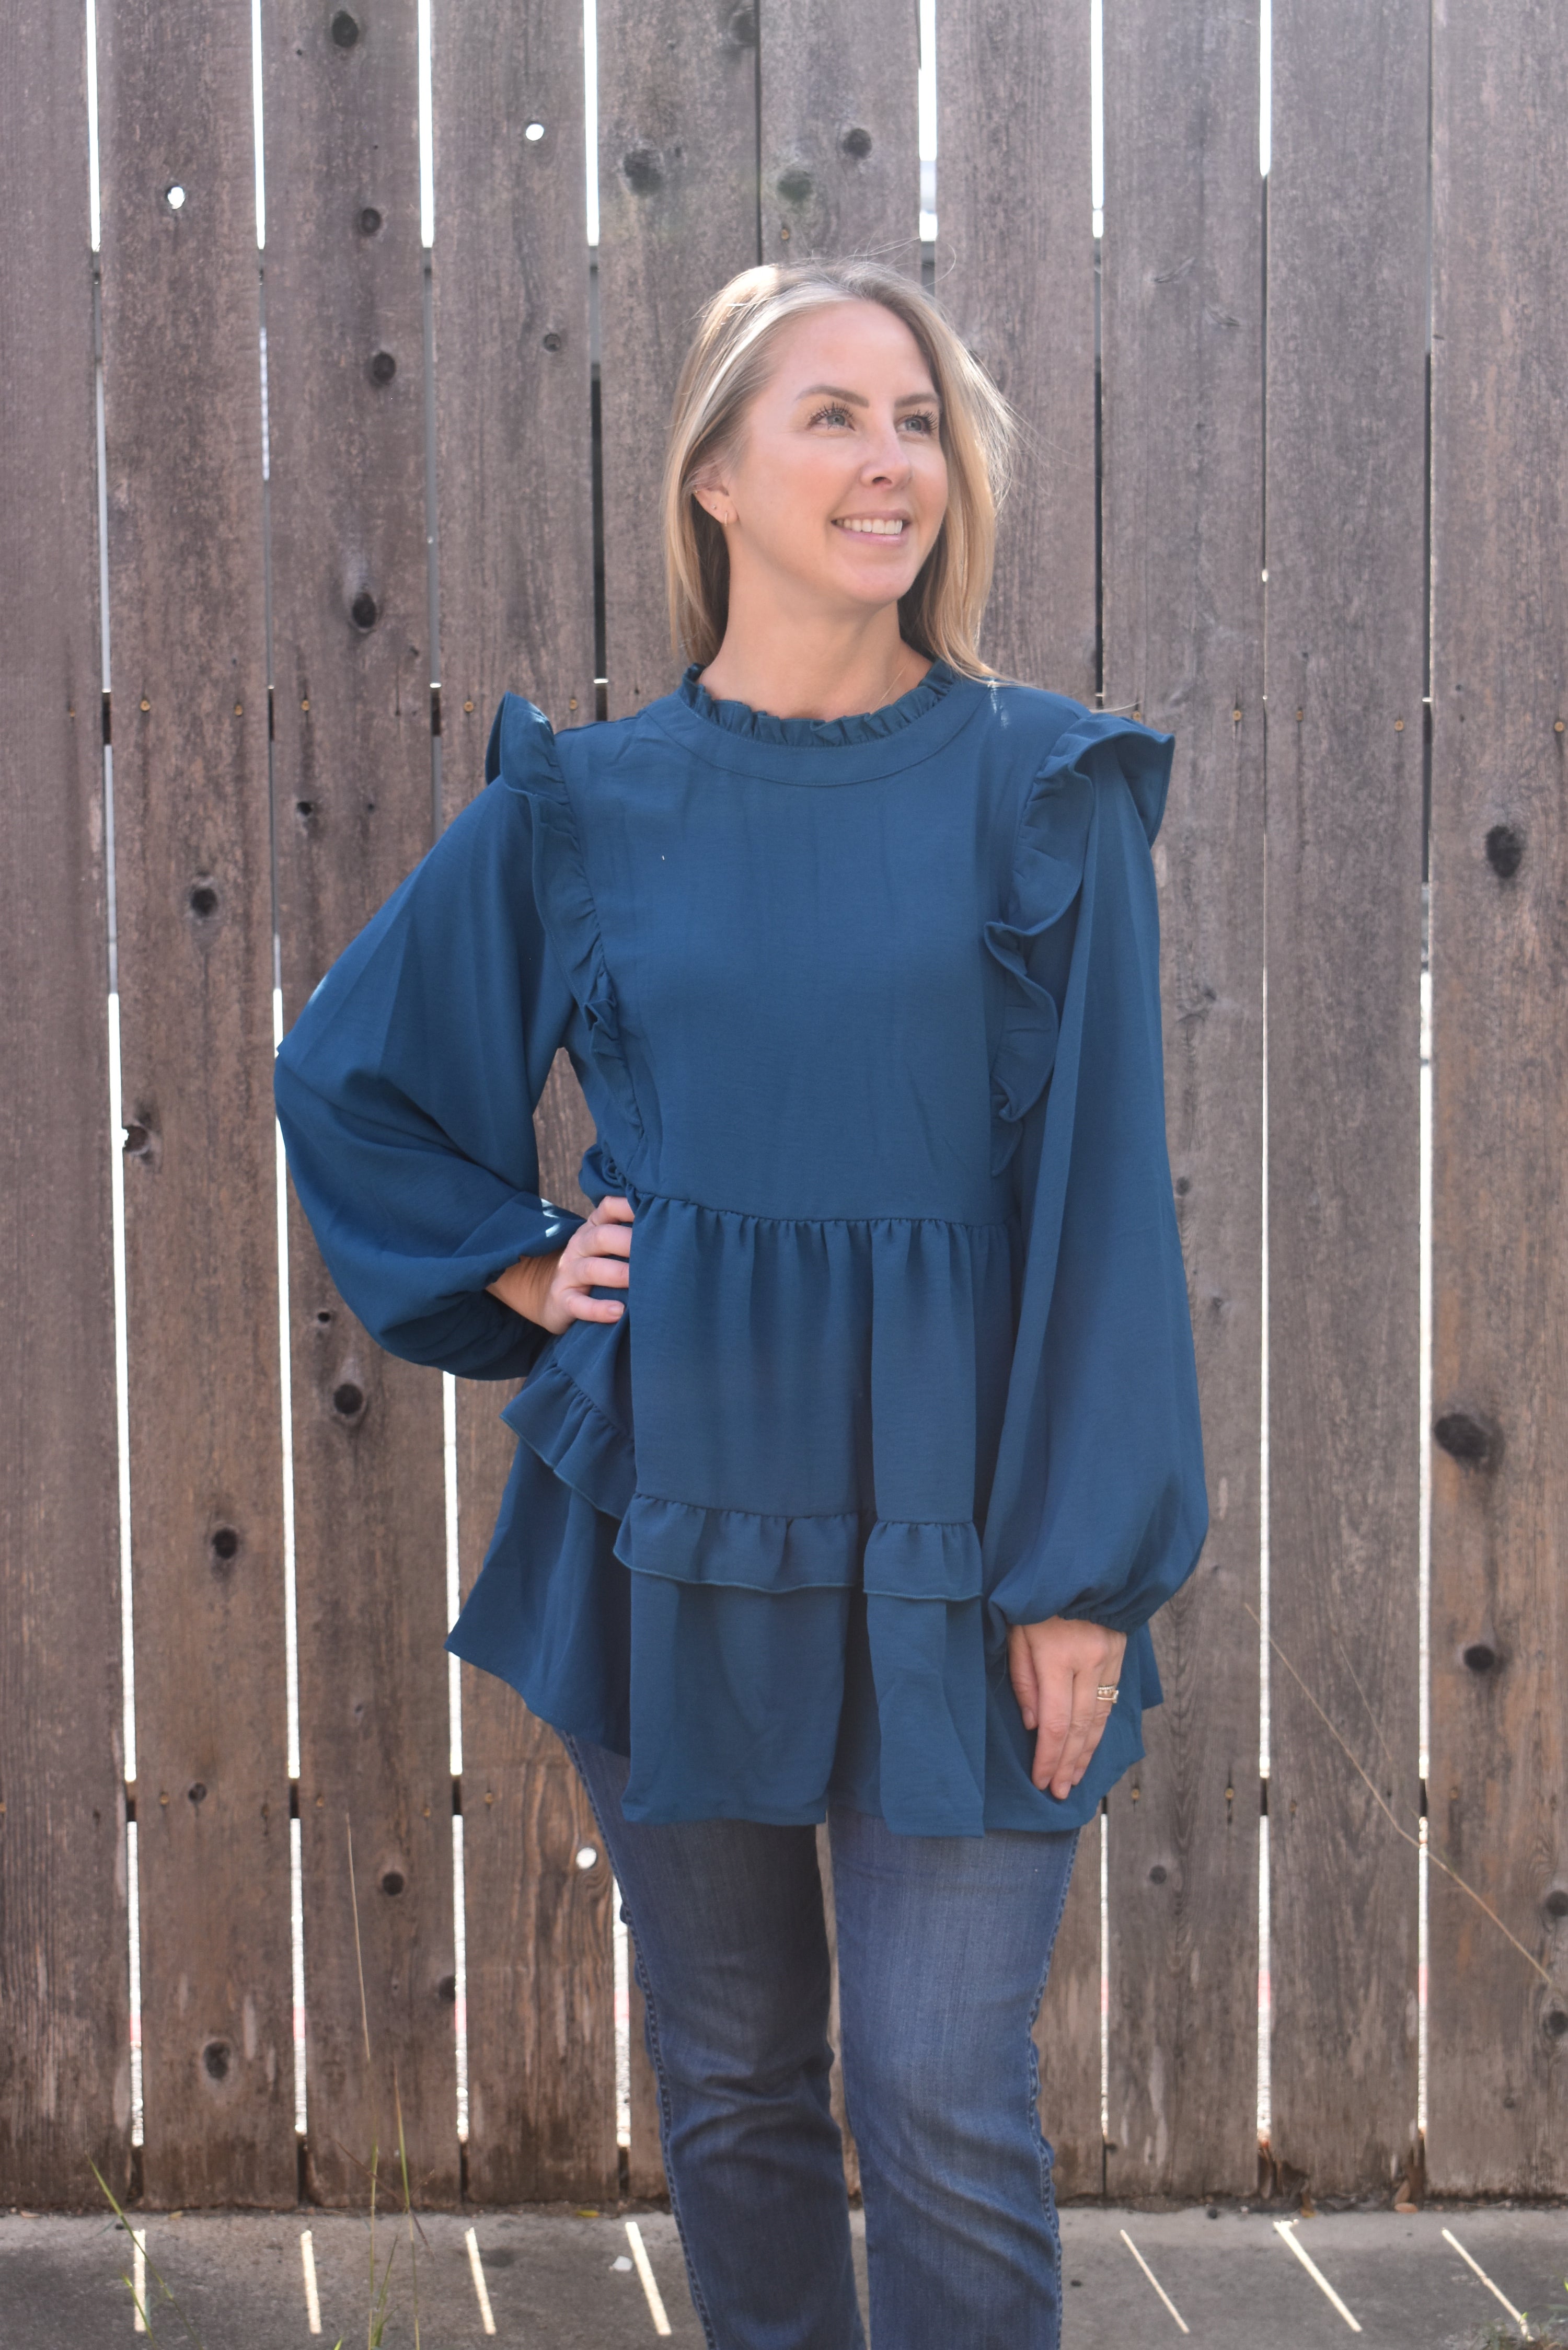 Teal blouse with ruffle long sleeves.